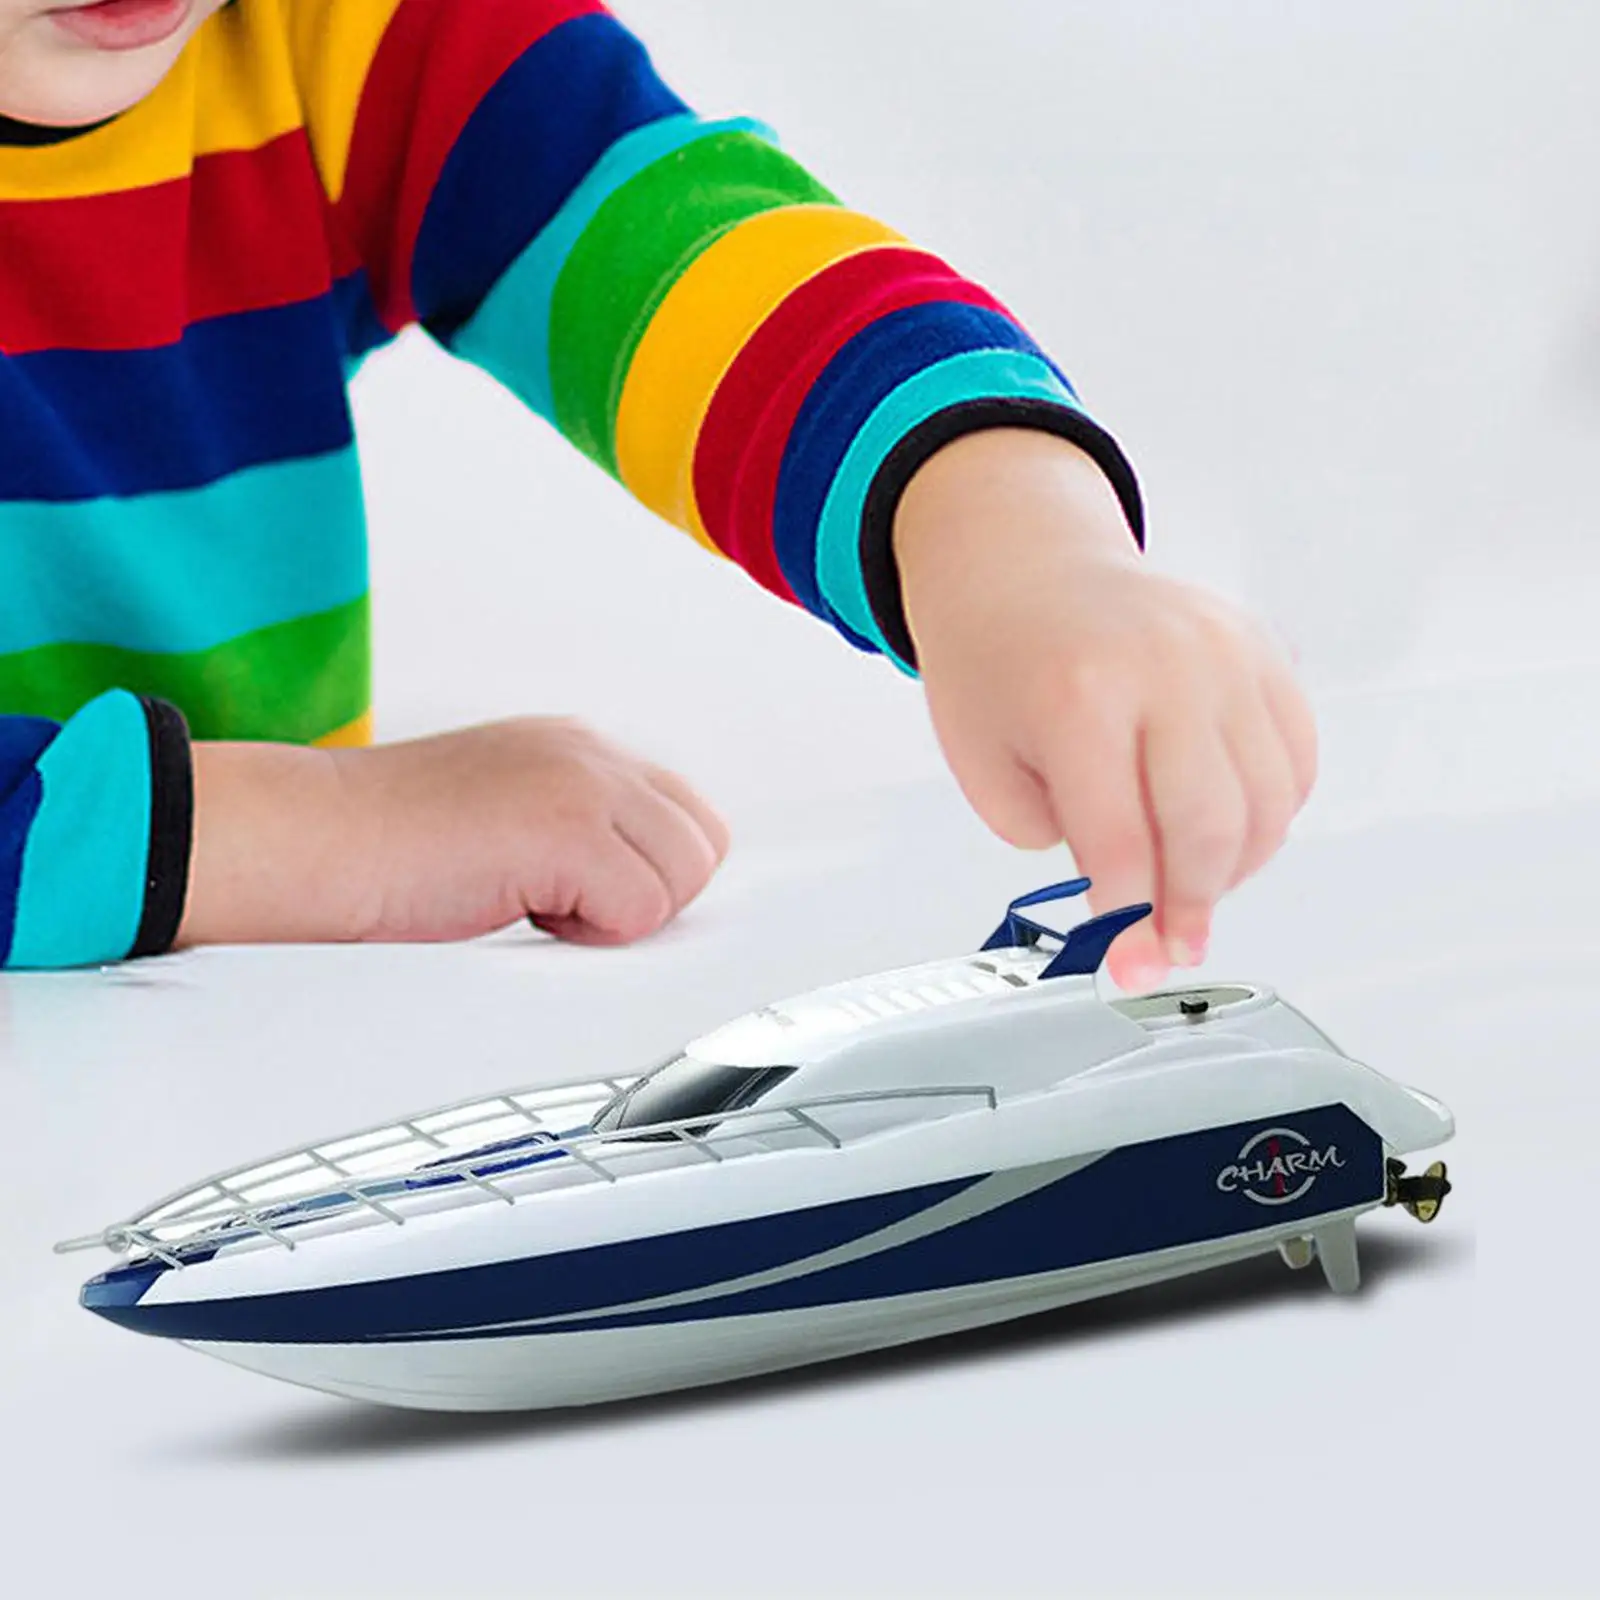 Remote Control Boat Toy Water Toy Boat RC Boat Warship Model USB Rechargeable for Adults Beginner Boys Kids Birthday Gifts